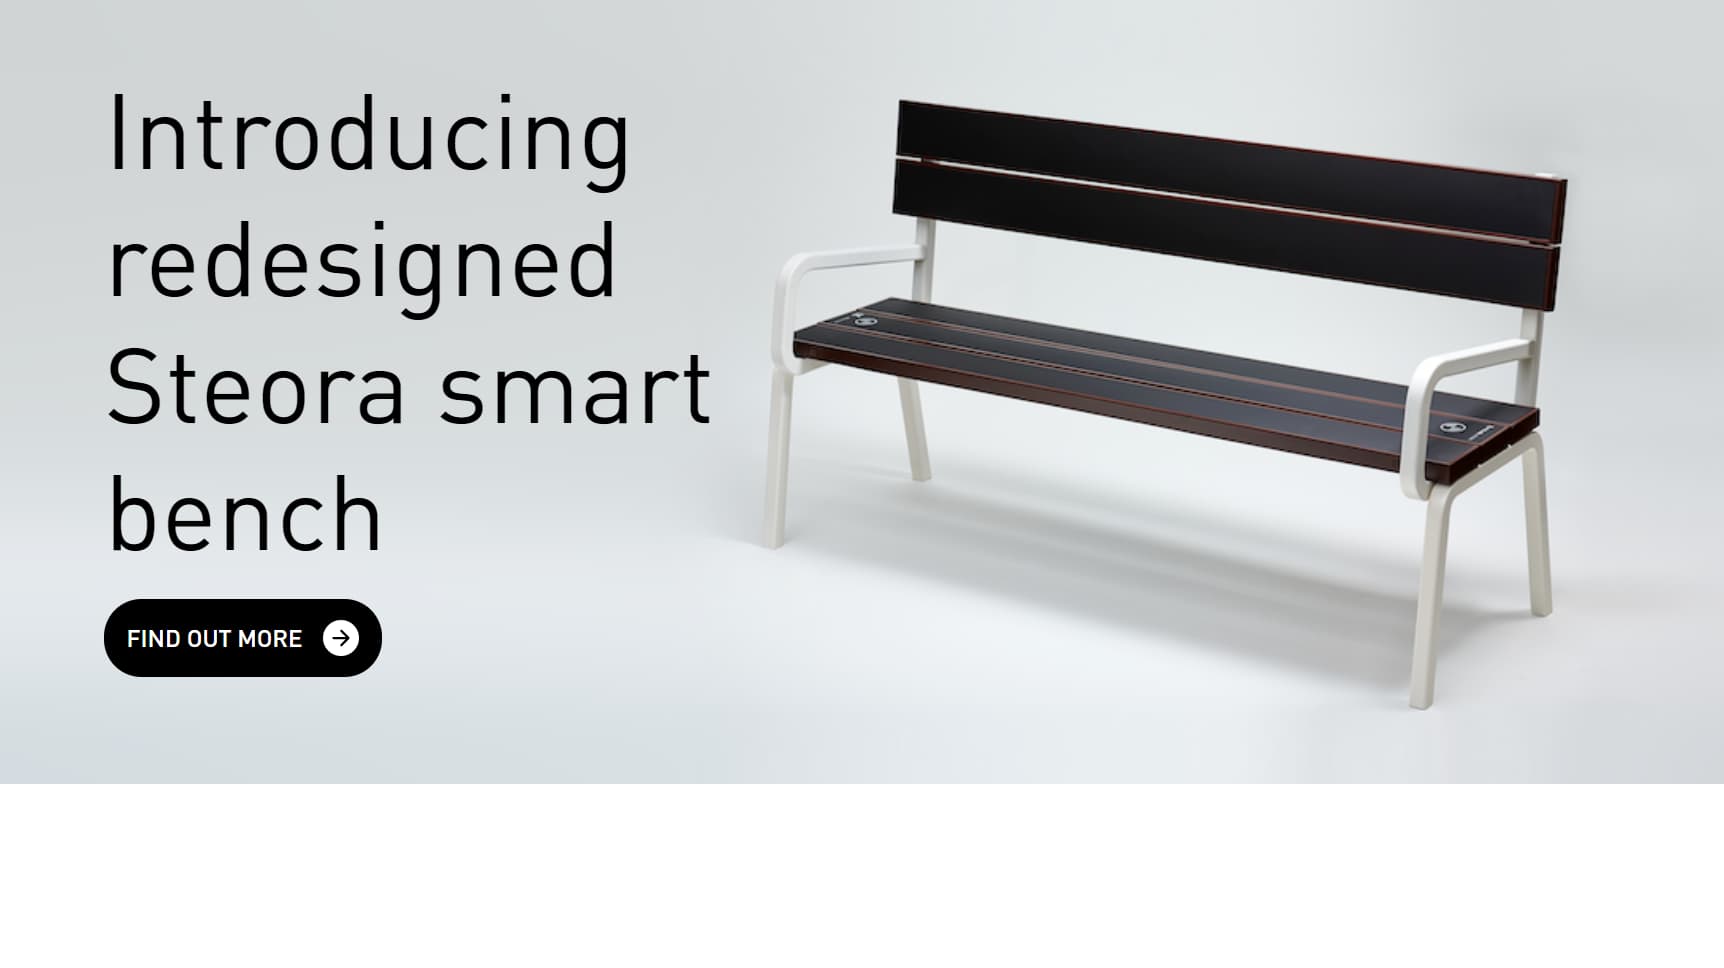 Introducing new collections of Steora smart bench